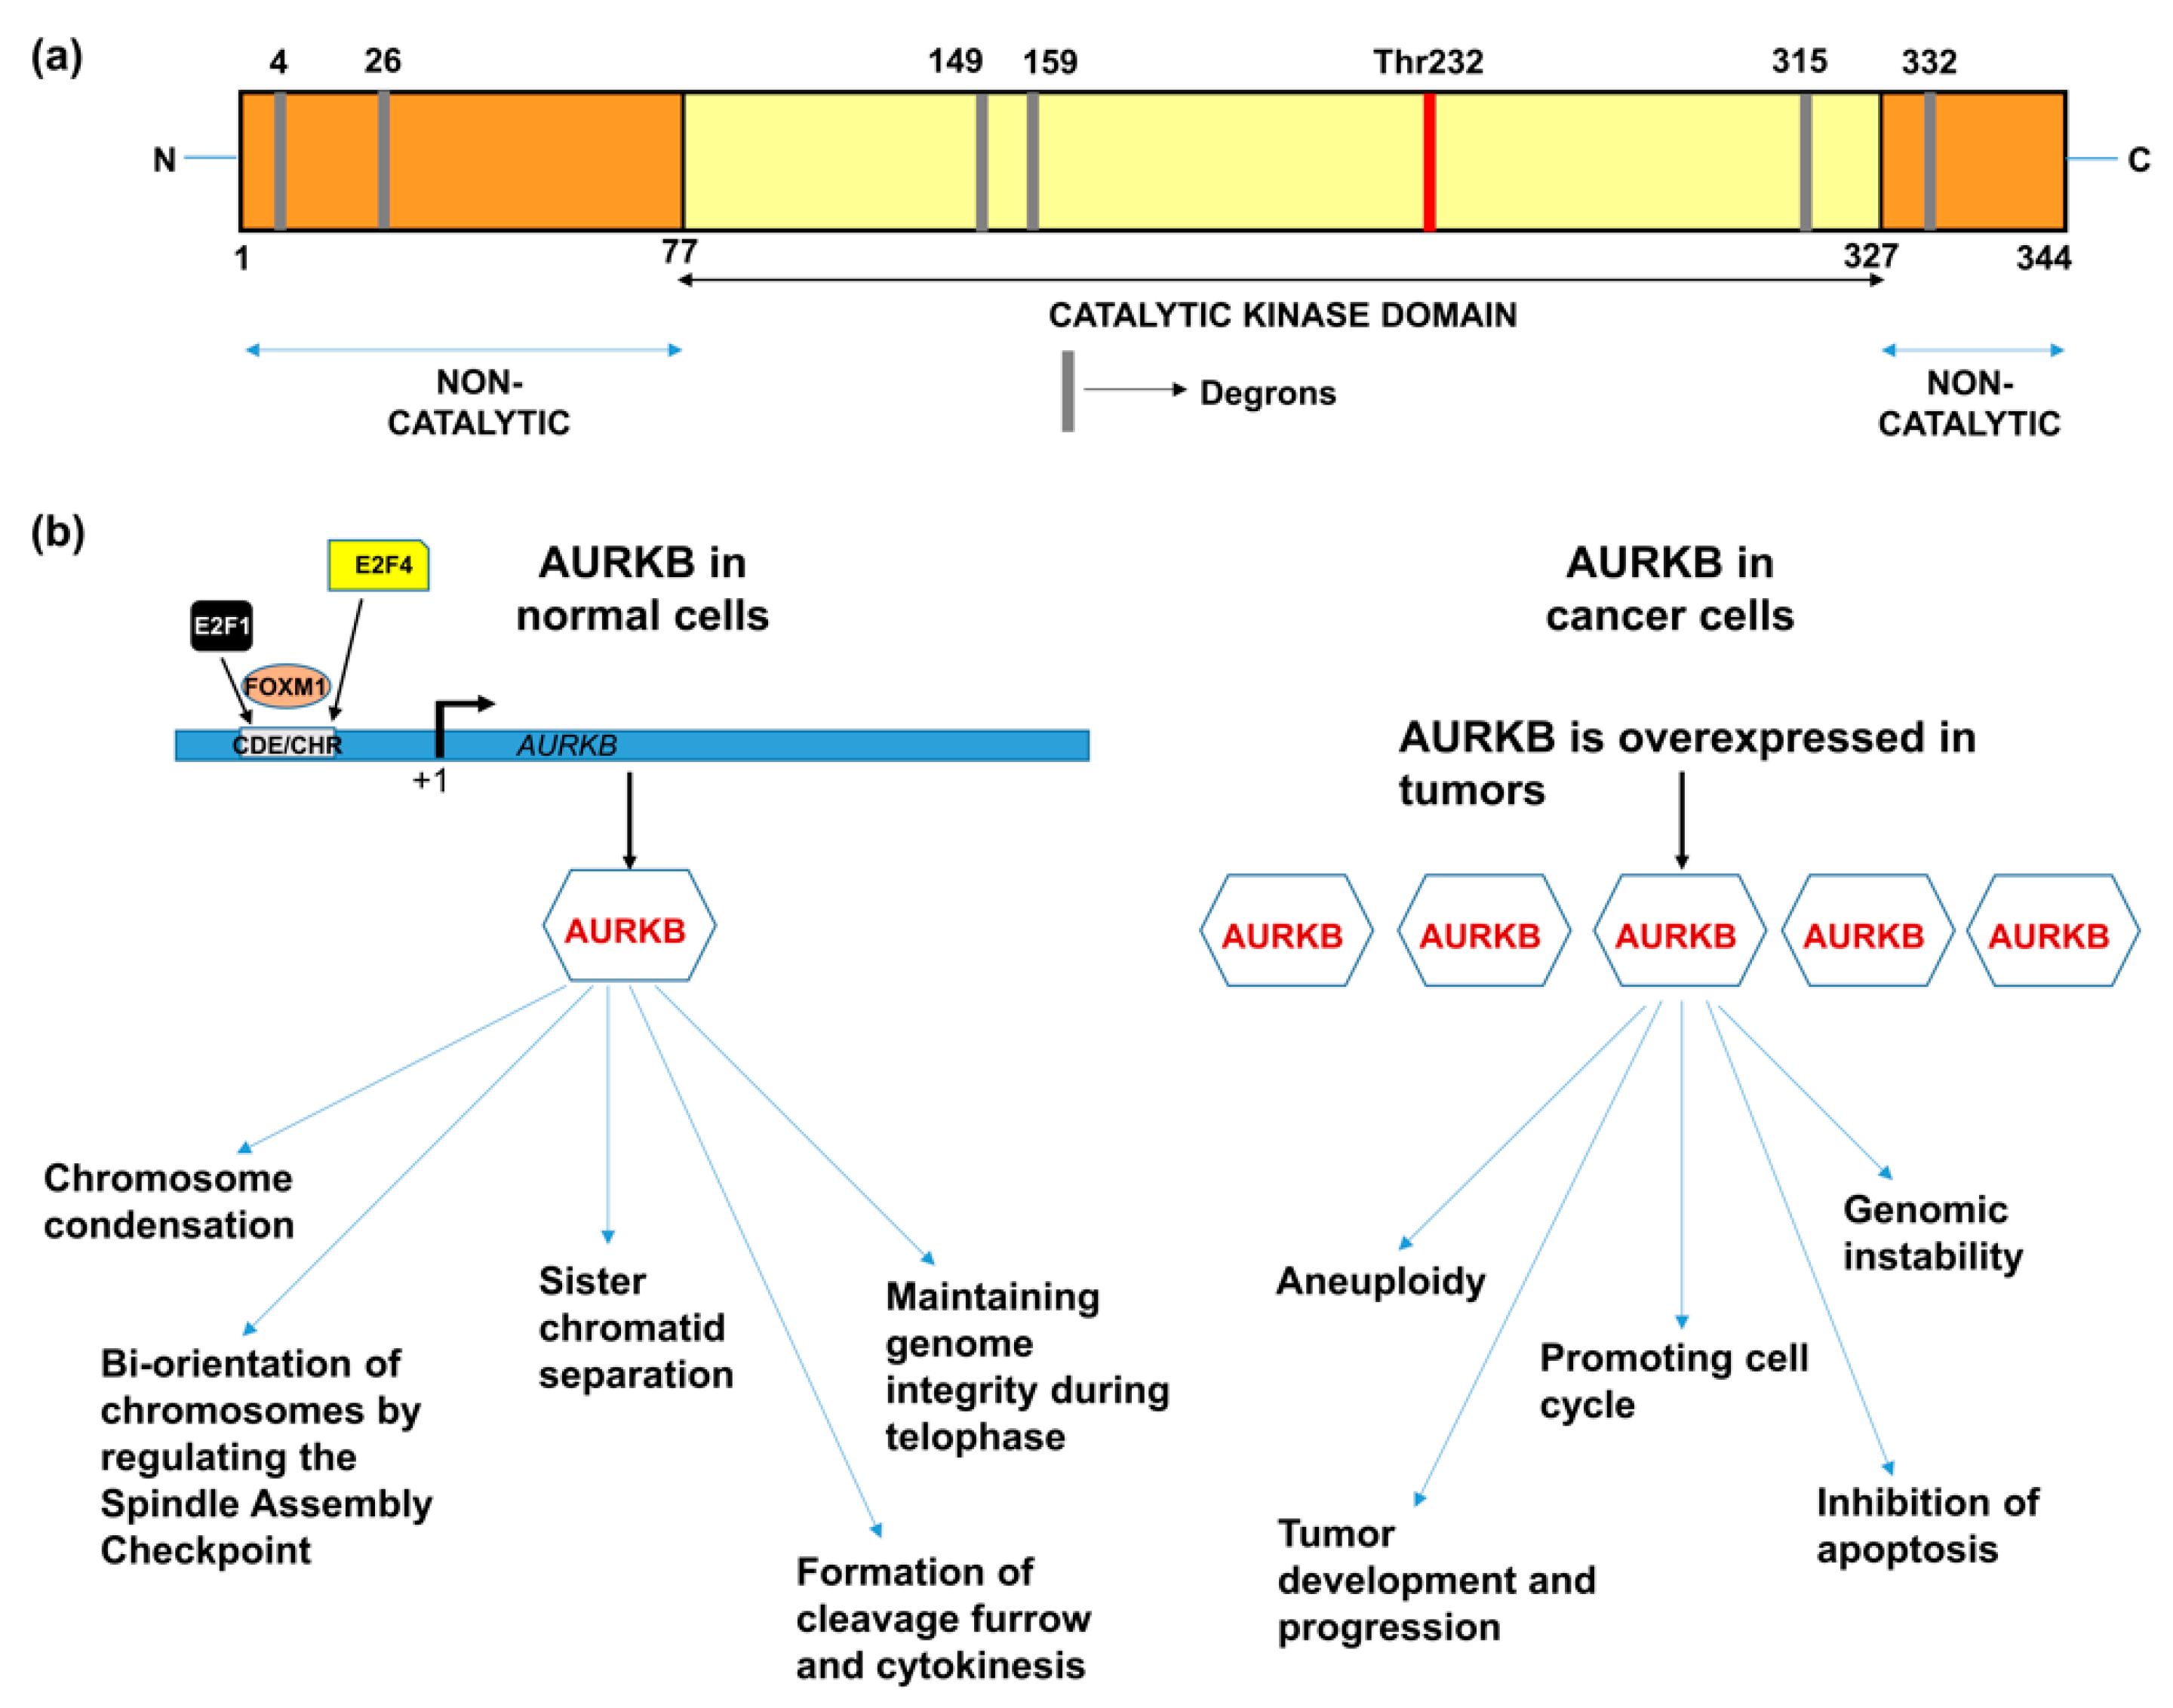 Intracellular infection by symbiotic bacteria requires the mitotic kinase  AURORA1